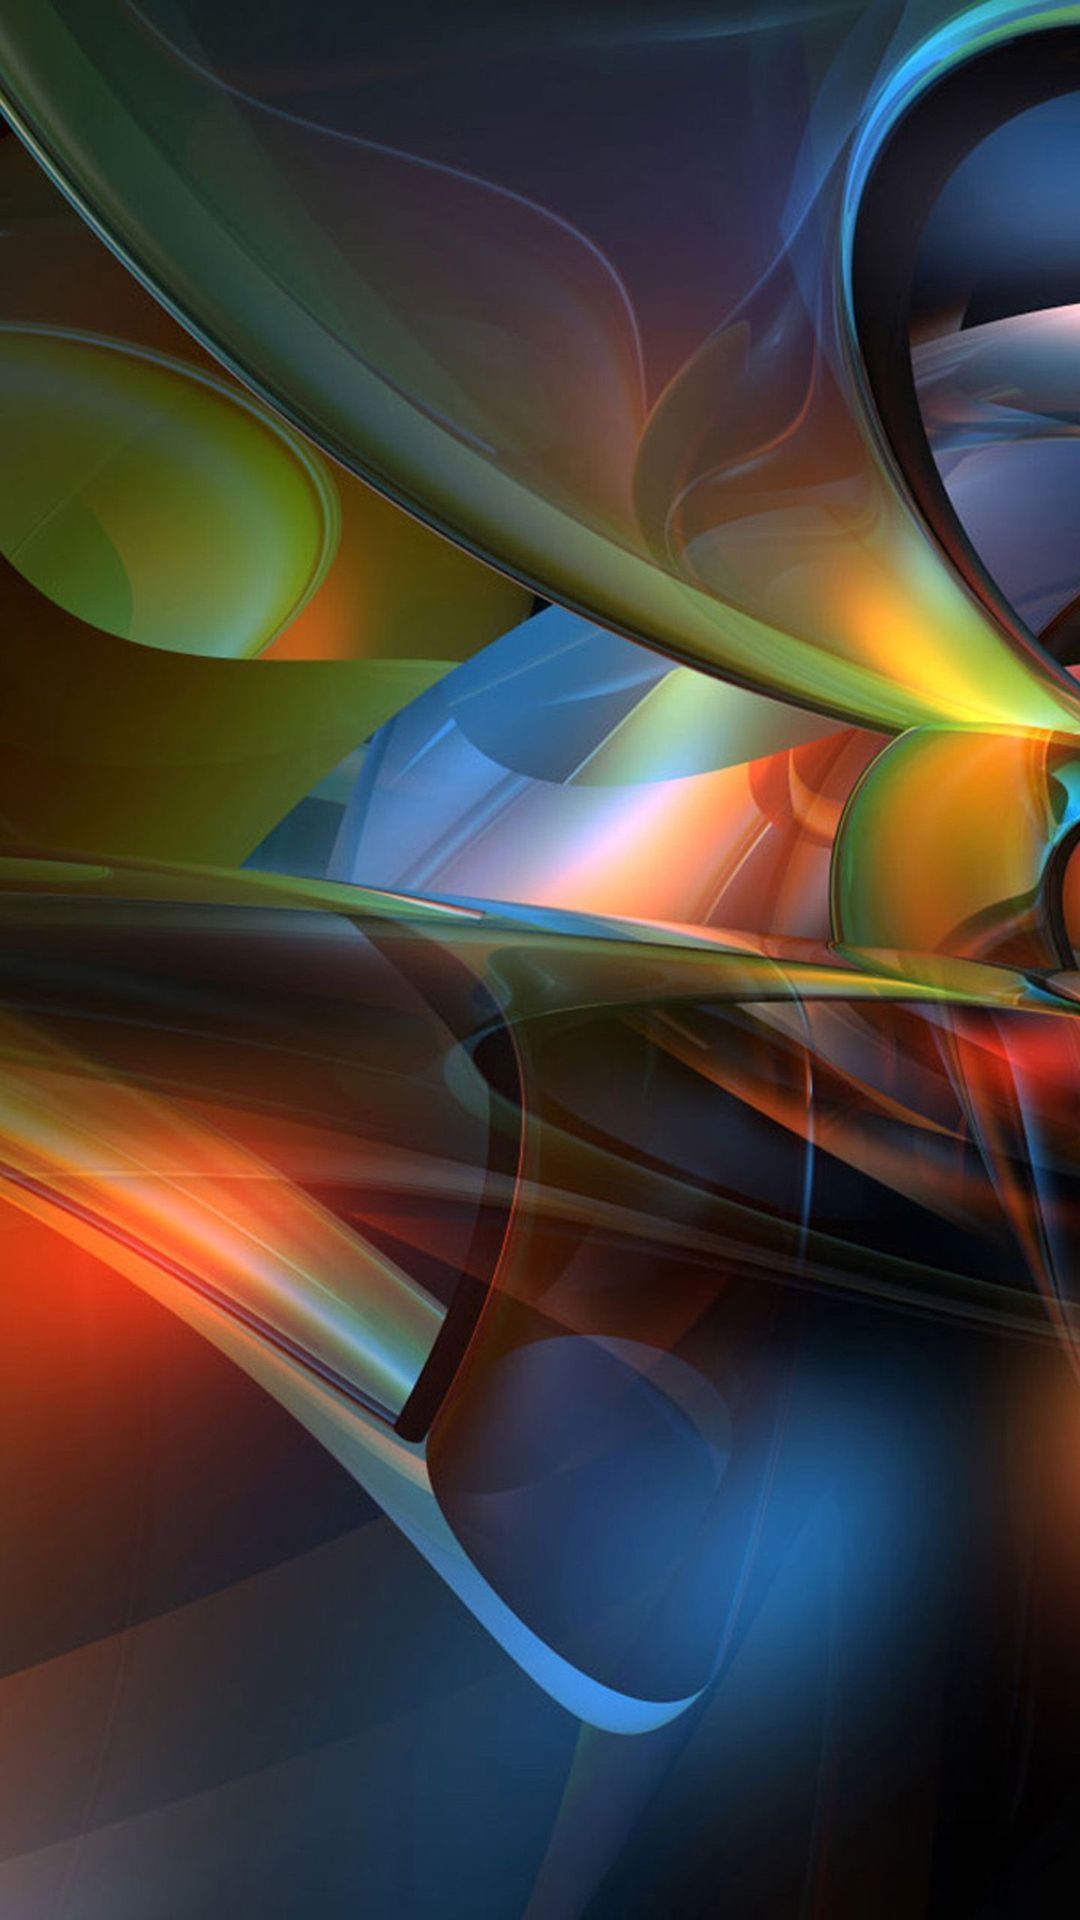 3D abstract mobile phone wallpaper